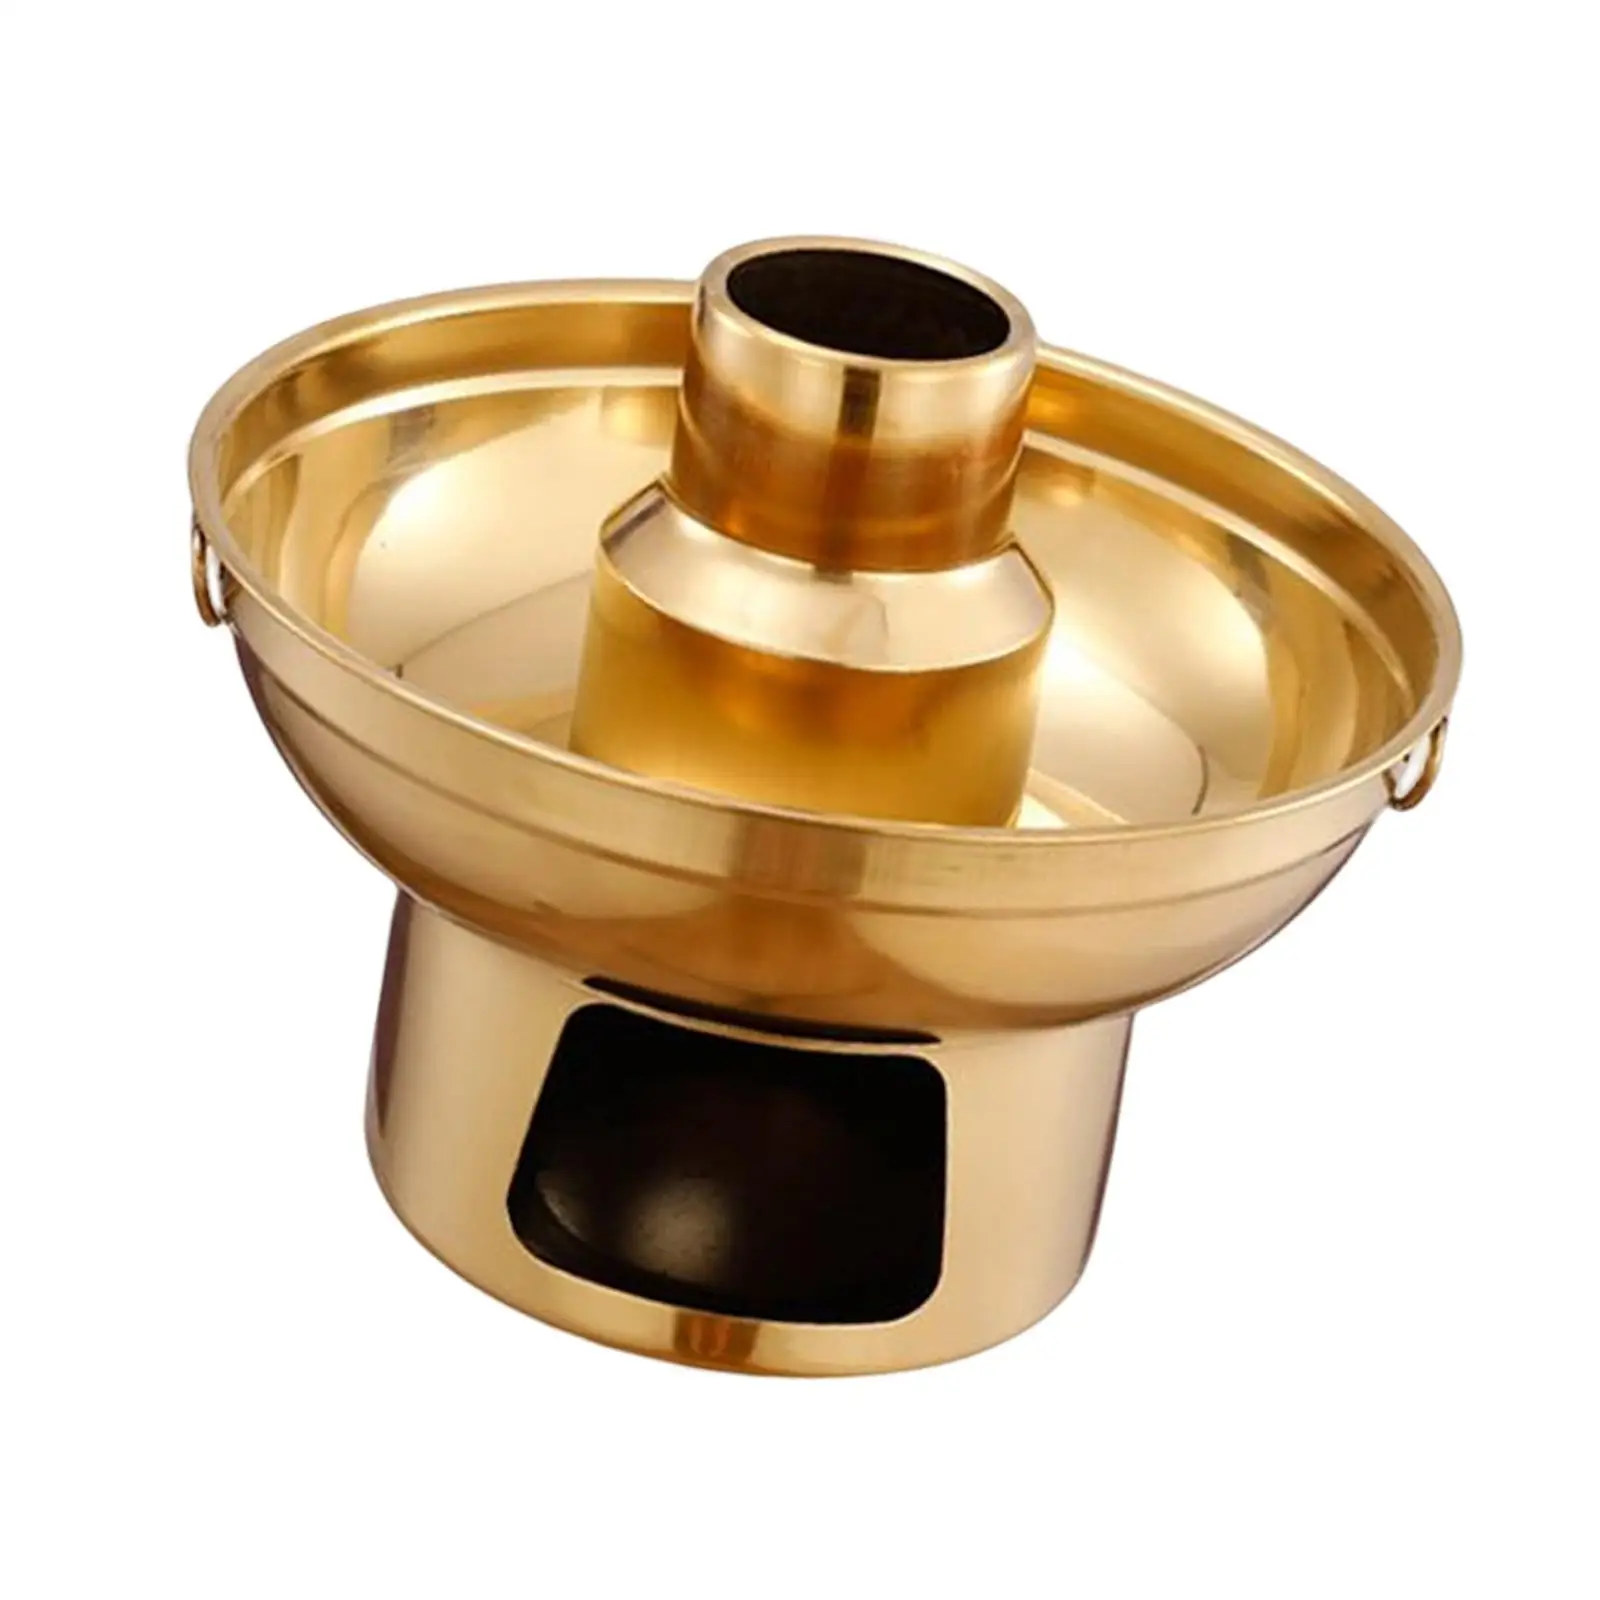 Chinese Small Hot Pot Household Heat Resistant Convenient to Use Kitchenware Portable Vintage Style Stainless Steel Hot Pot